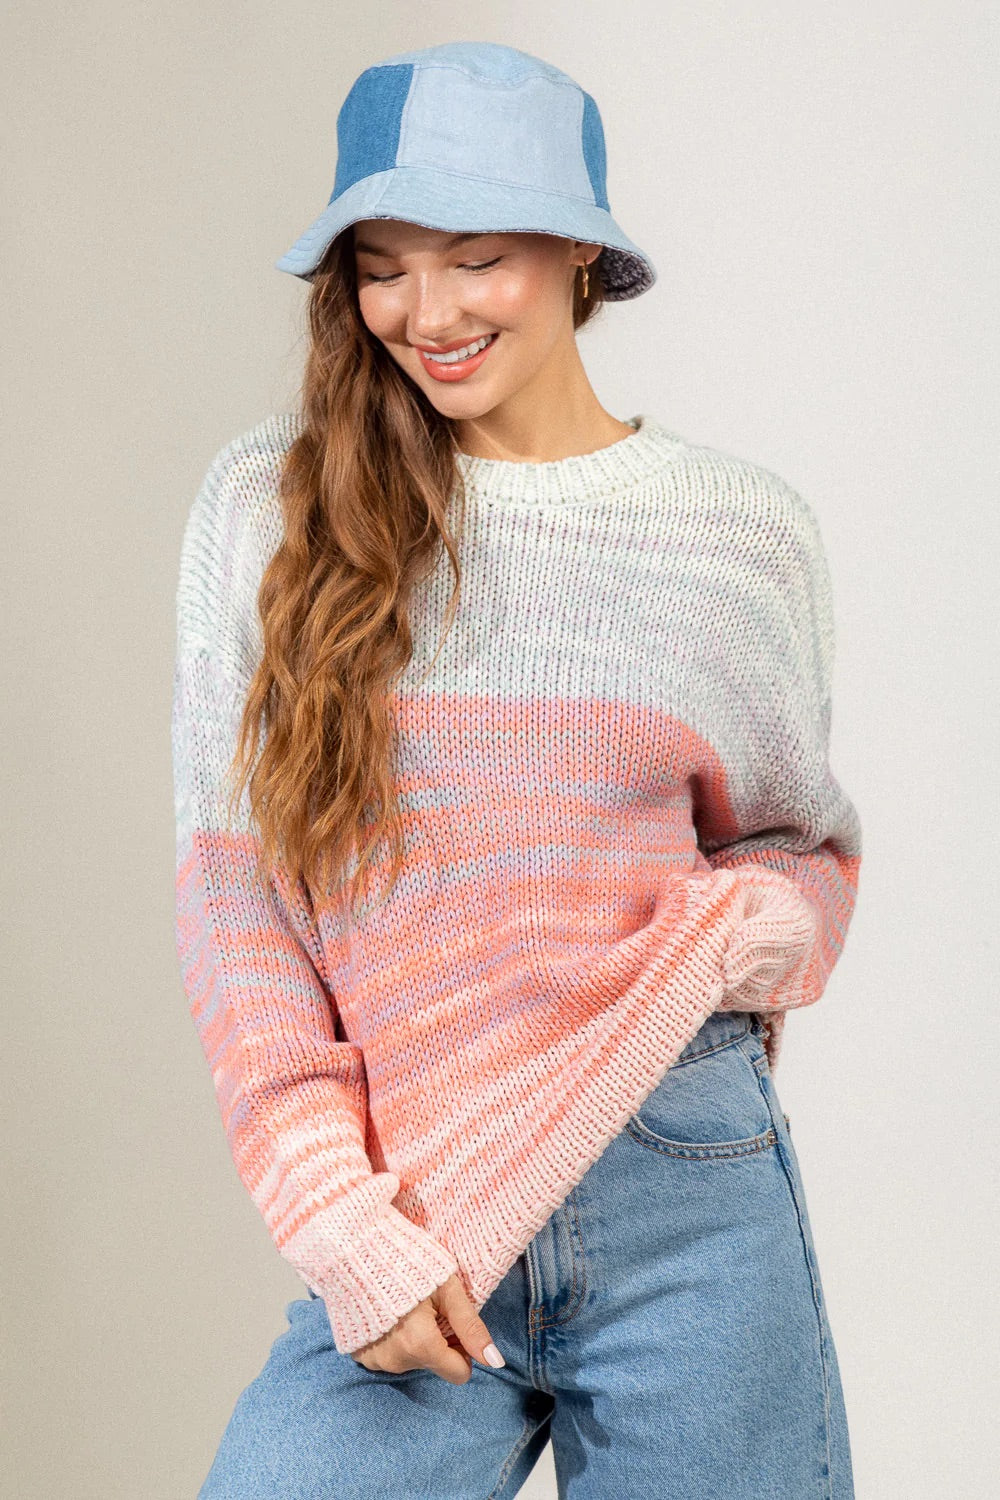 Cora Relaxed Fit Sweater - Lark & Lily Boutique